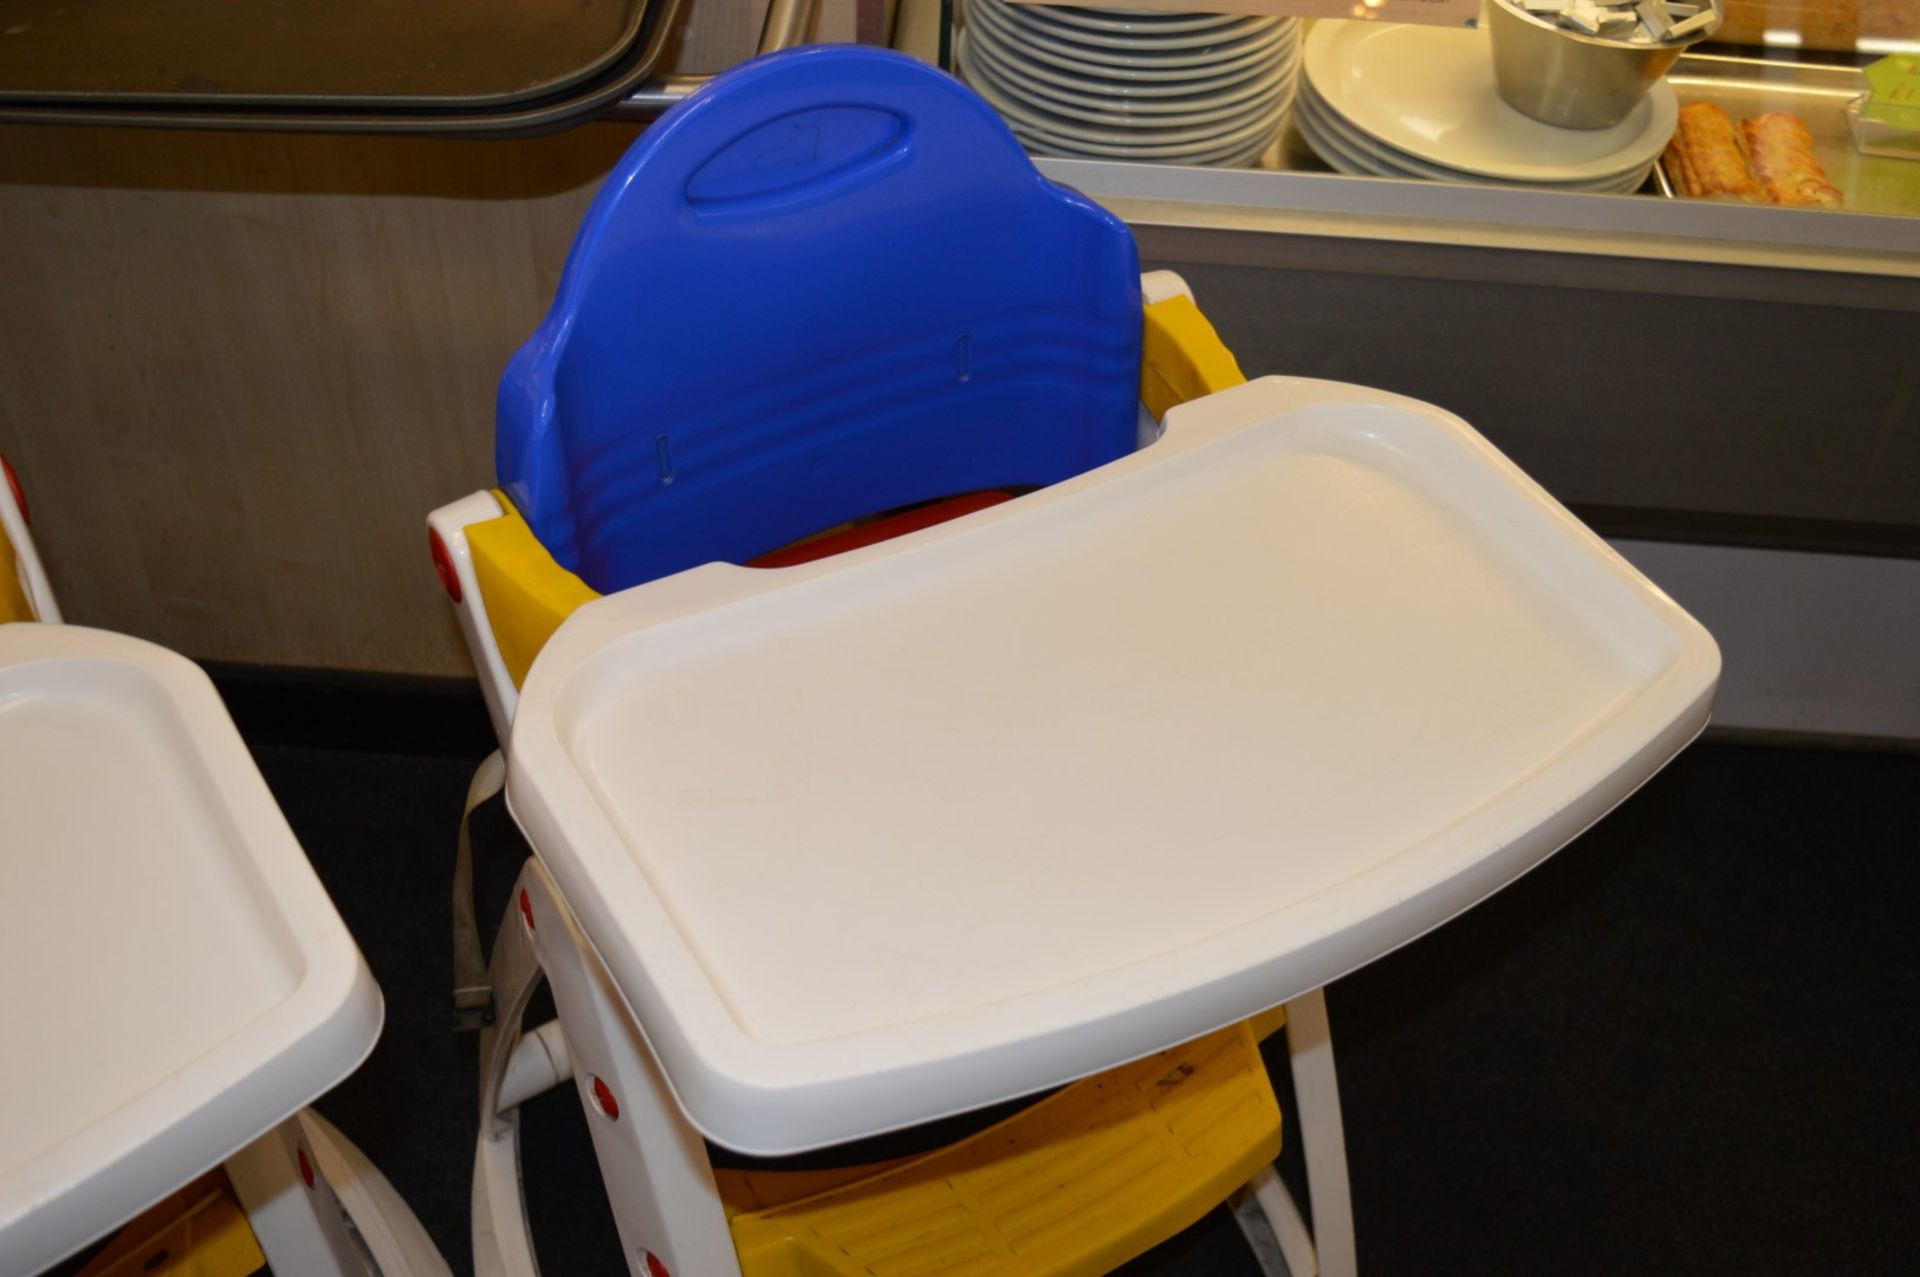 2 x Childrens High Chairs - K&D Design - Colourful Design - 3 Stage Highchair, Yourth Chair and - Image 3 of 4